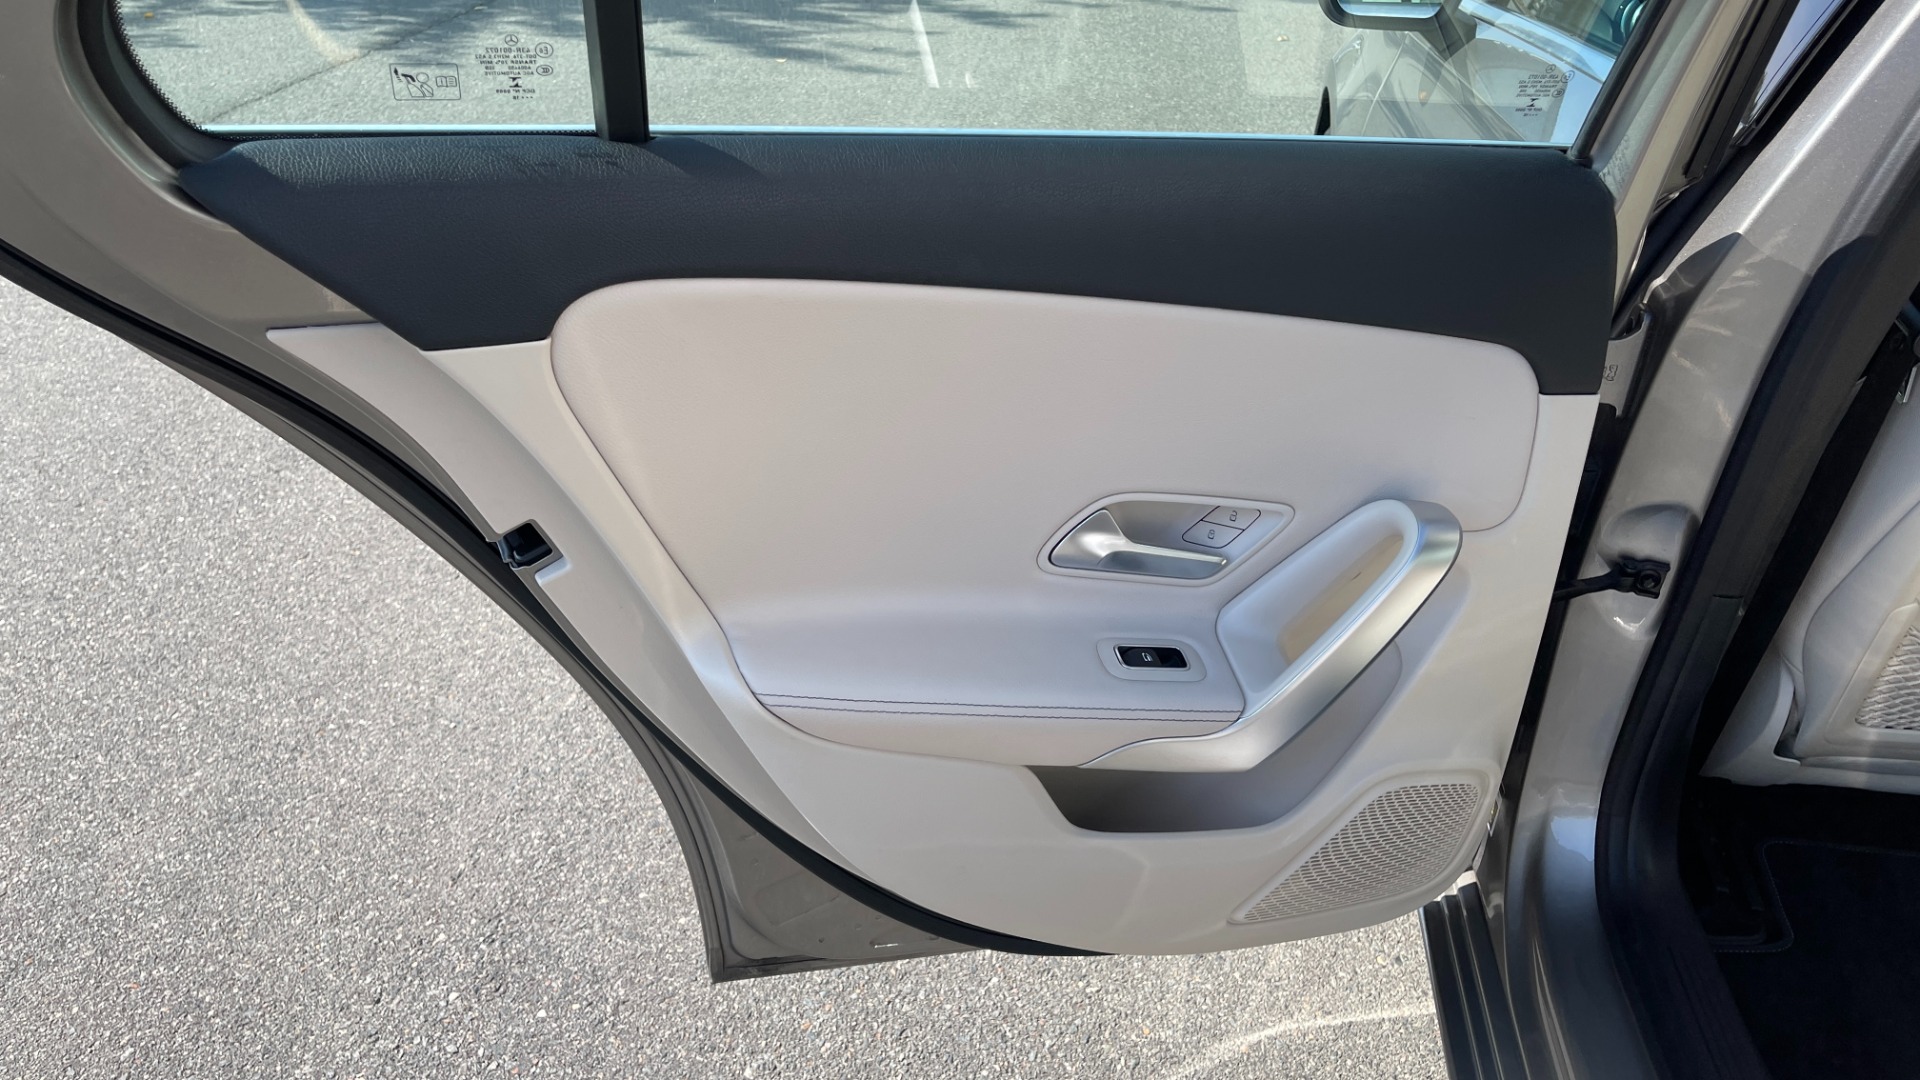 Used 2019 Mercedes-Benz A-Class A220 / PREMIUM / AMBIENT LIGHTING / BLIND SPOT / WIRELESS CHARGING for sale $30,599 at Formula Imports in Charlotte NC 28227 34